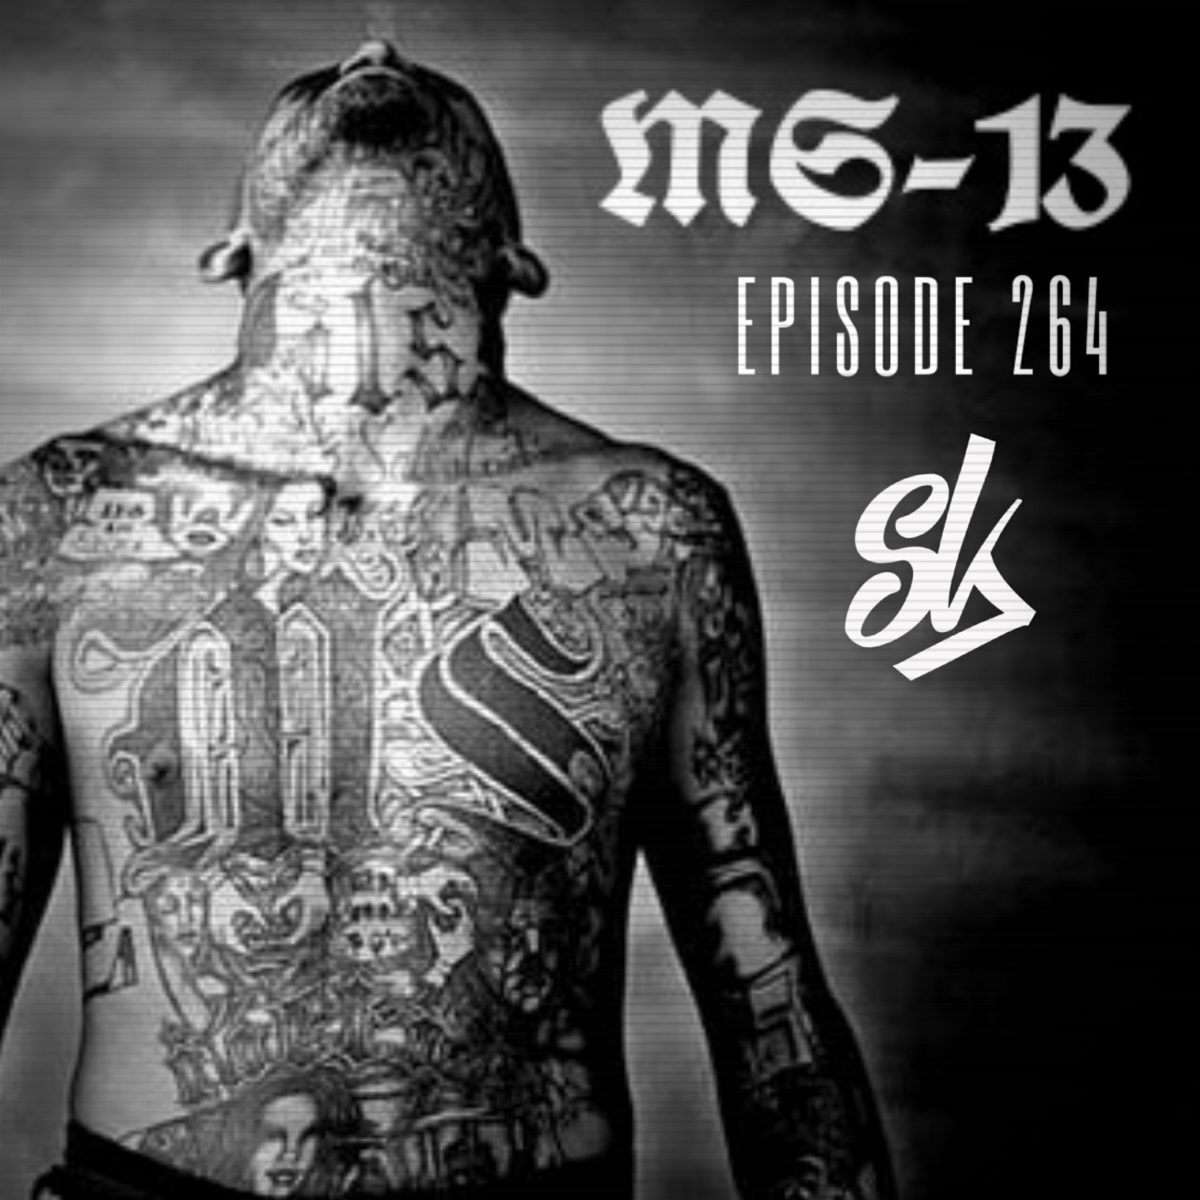 Episode 264: MS13: The World's Most Dangerous Gang - Sofa 